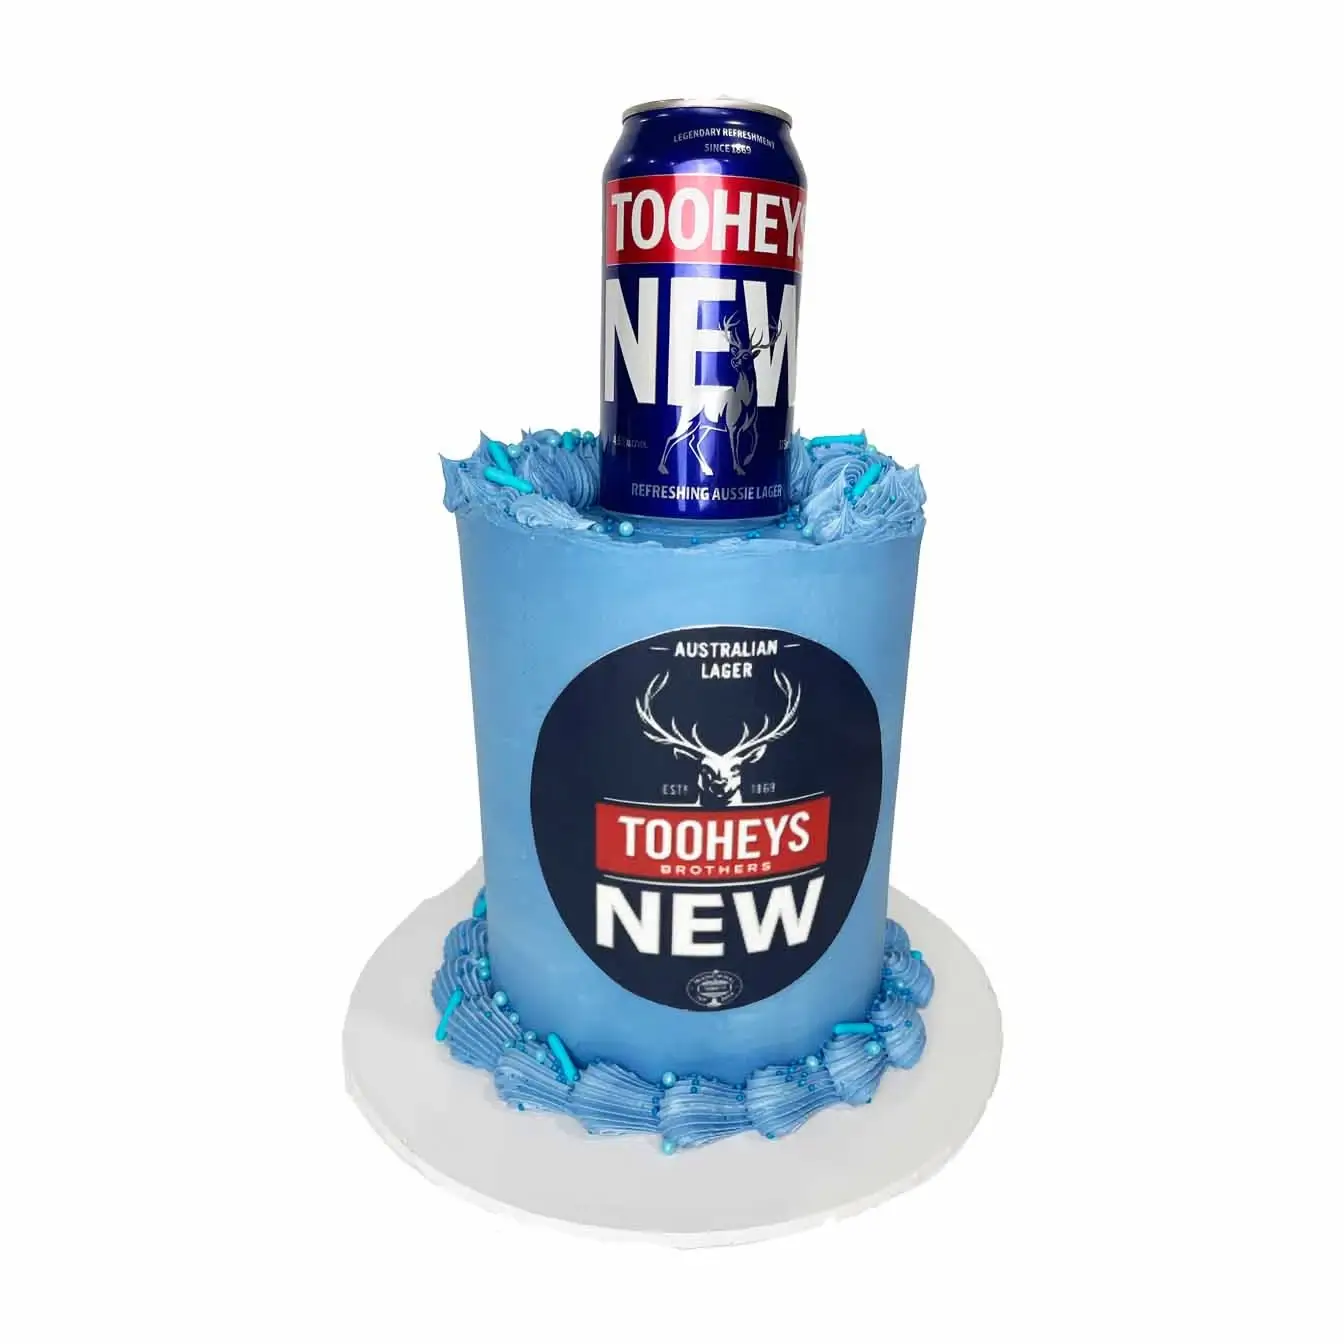 Brewmaster's Delight Cake - A beer-themed cake with beer can topper and matching colored icing, a flavorful centerpiece for beer enthusiasts and casual celebrations.